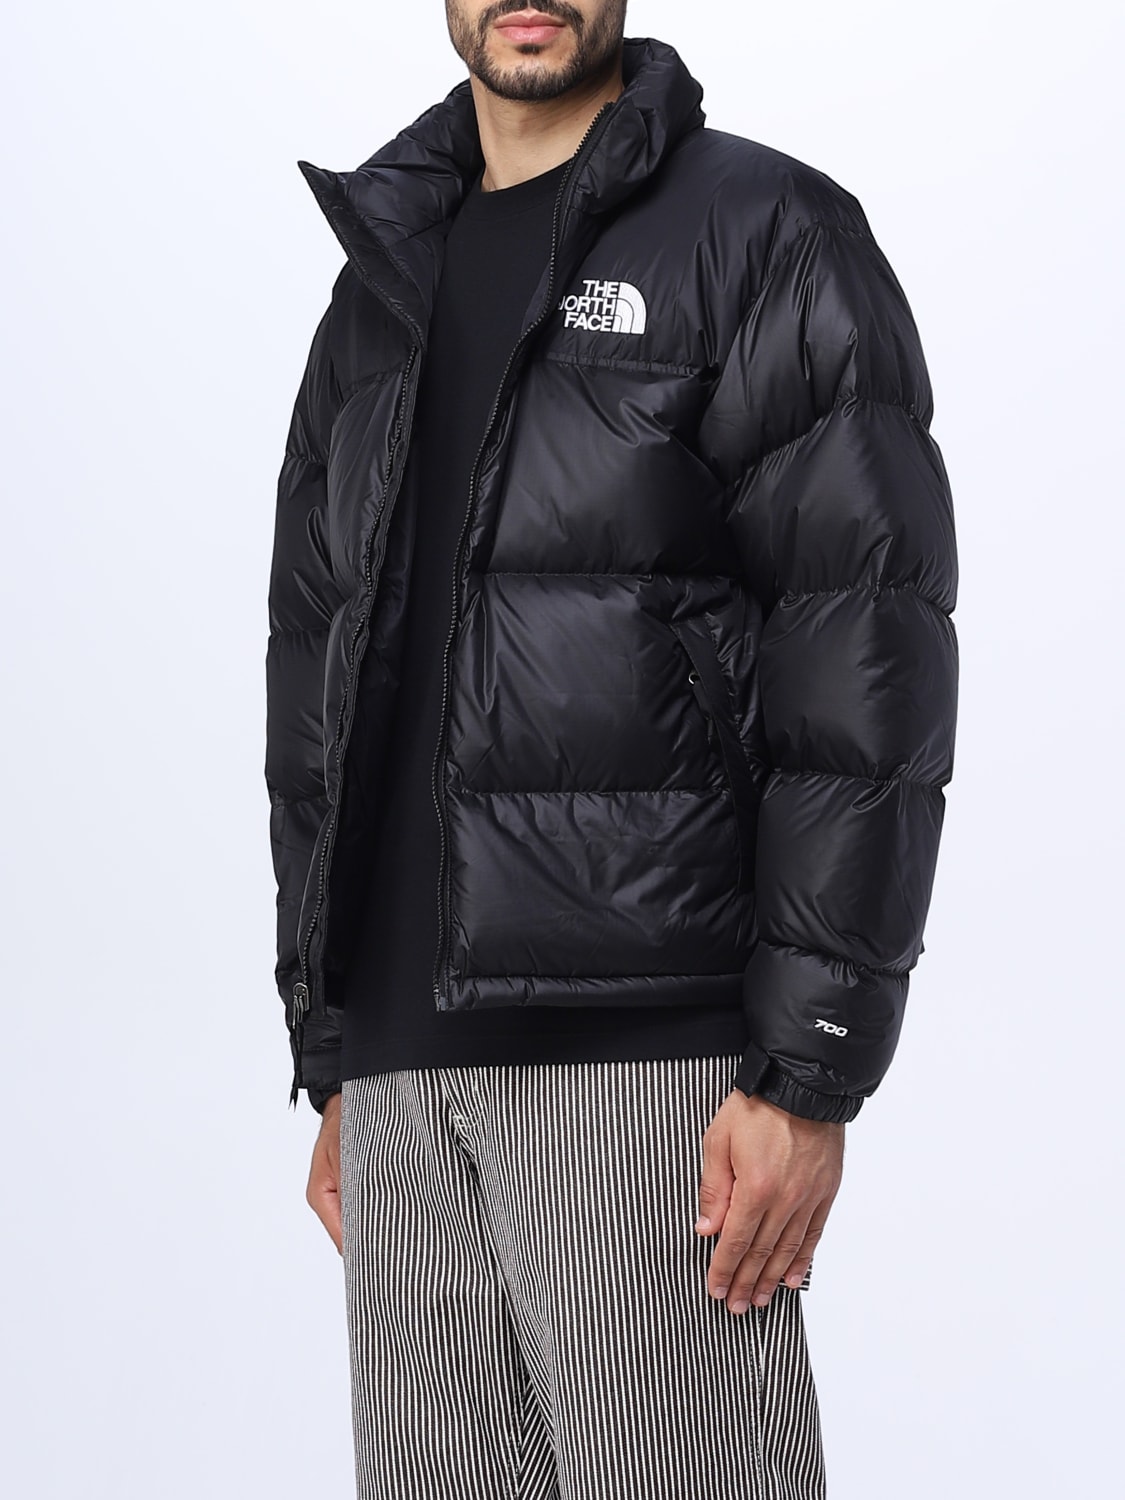 THE NORTH FACE: jacket for men - Black | The North Face jacket NF0A3C8D ...